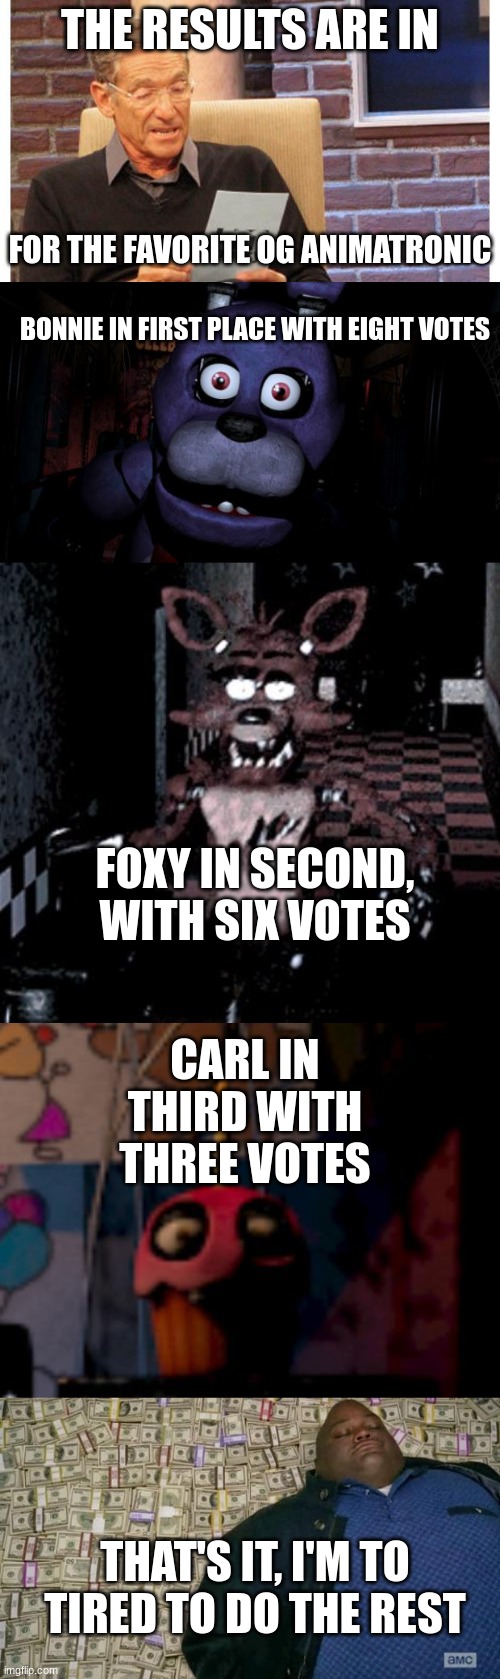 The results are in | THE RESULTS ARE IN; FOR THE FAVORITE OG ANIMATRONIC; BONNIE IN FIRST PLACE WITH EIGHT VOTES; FOXY IN SECOND, WITH SIX VOTES; CARL IN THIRD WITH THREE VOTES; THAT'S IT, I'M TO TIRED TO DO THE REST | image tagged in maury povich,fnaf bonnie,foxy running,five nights at freddy's fnaf carl the cupcake,huell money | made w/ Imgflip meme maker